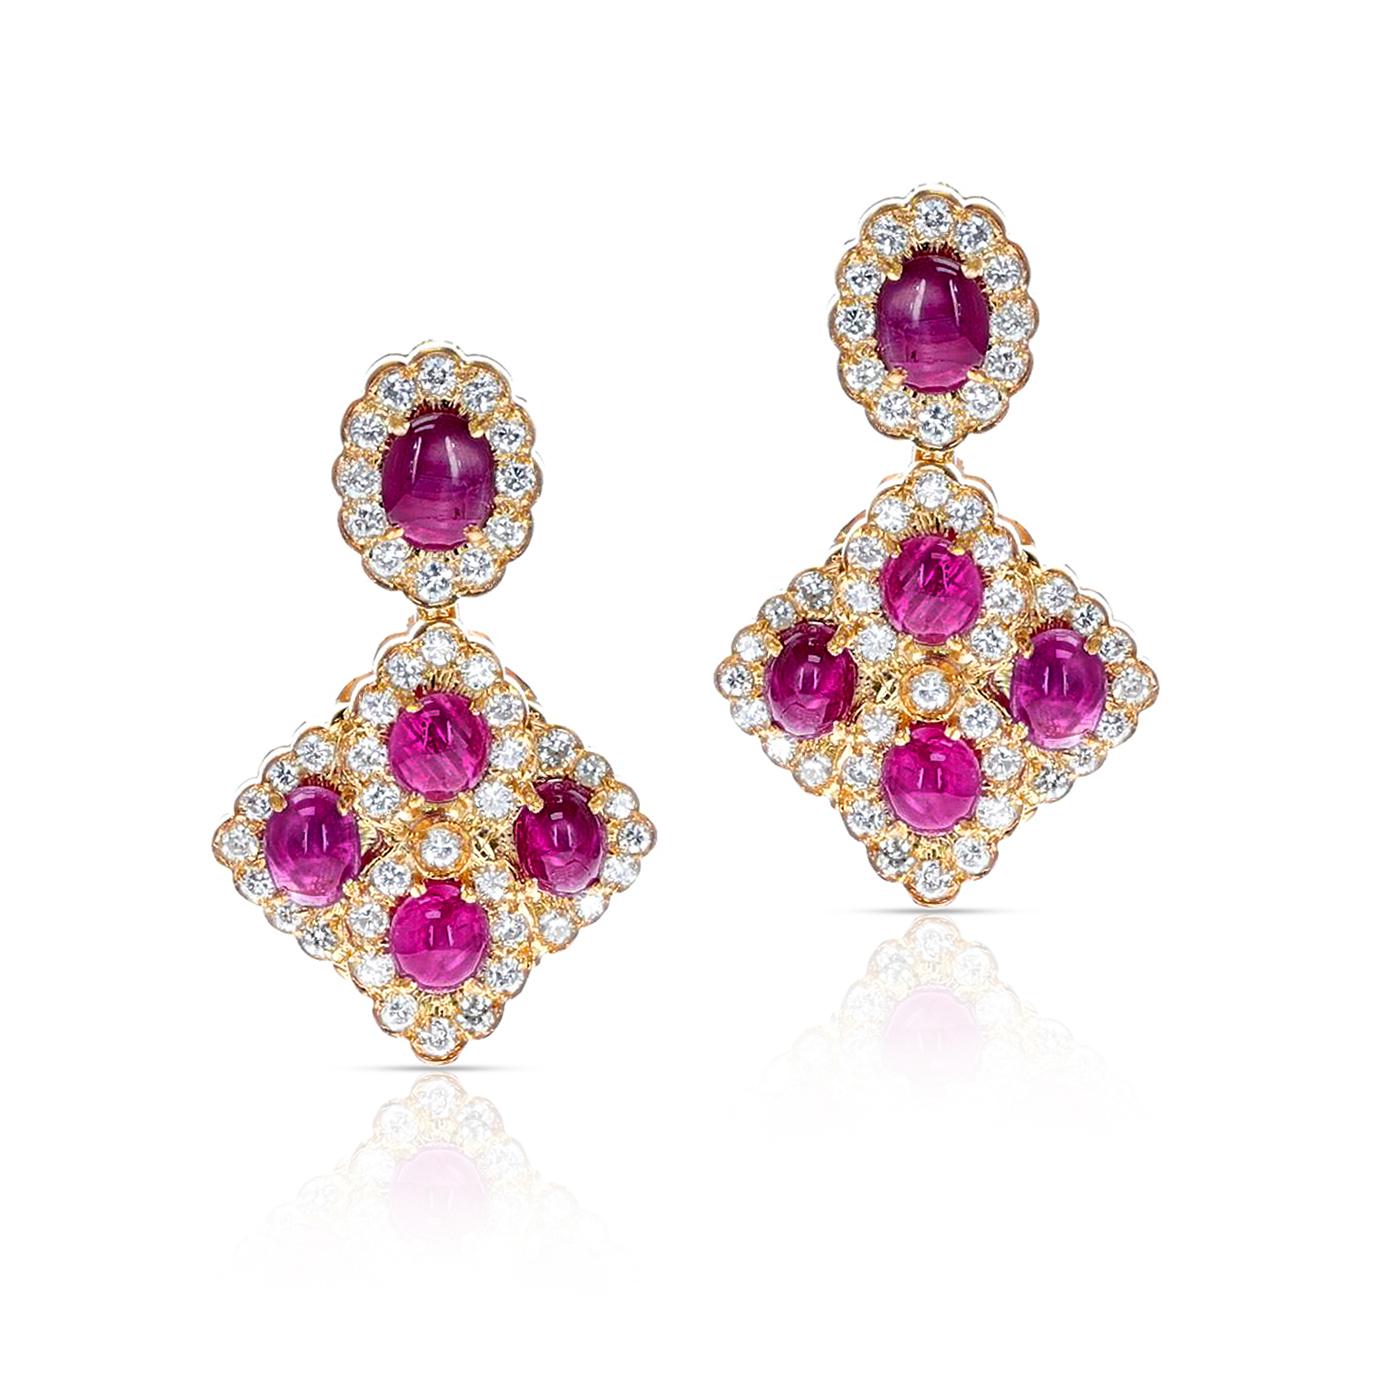 A stunning Unheated 10 Burma Star Ruby Cabochon and Diamond pair of earrings, part of a set which includes earrings and two pendants. Please contact us for more information on the set. Length: 1.45